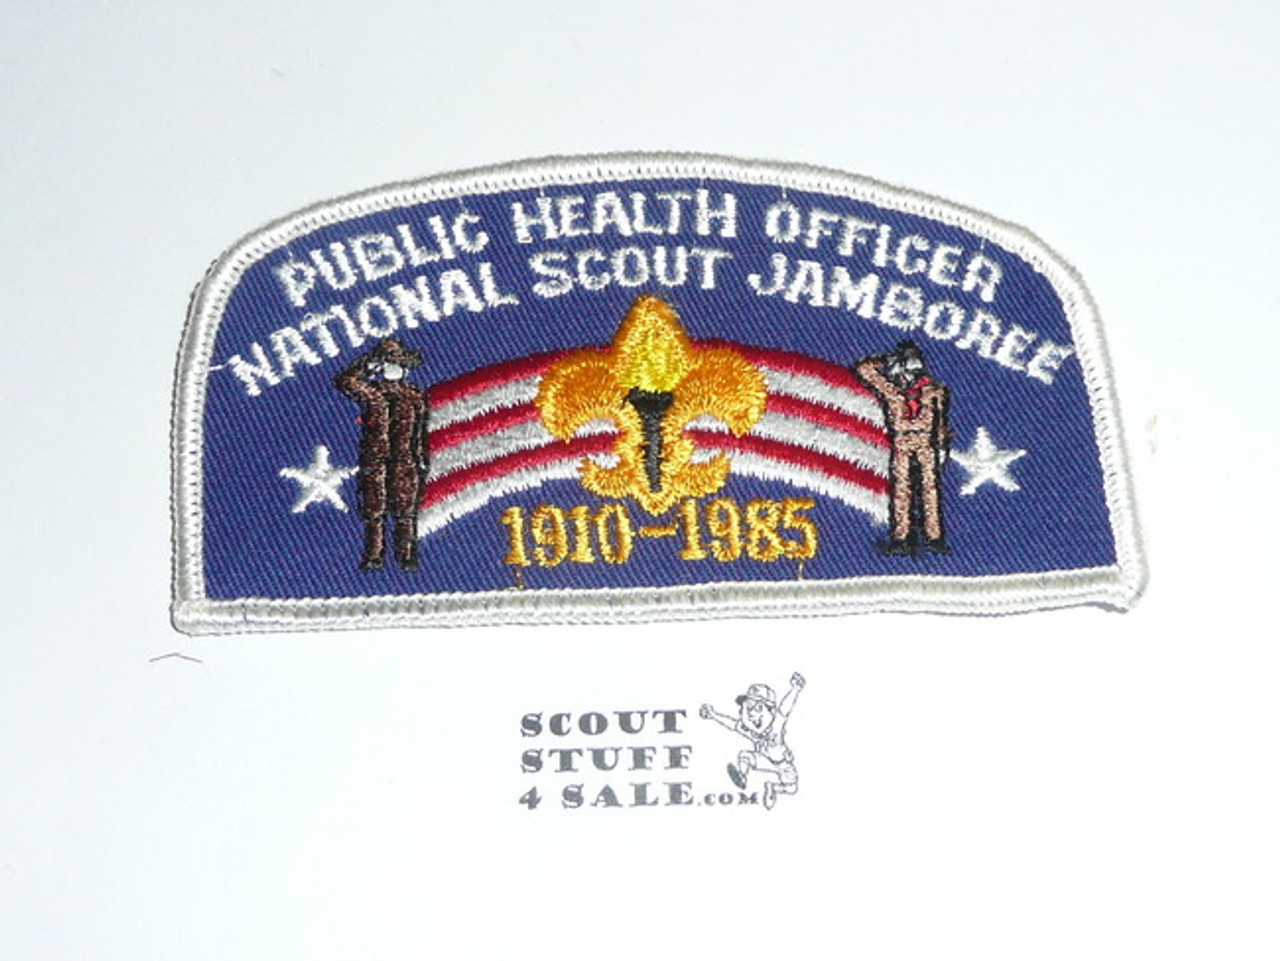 1985 National Jamboree Public Health Officer Patch